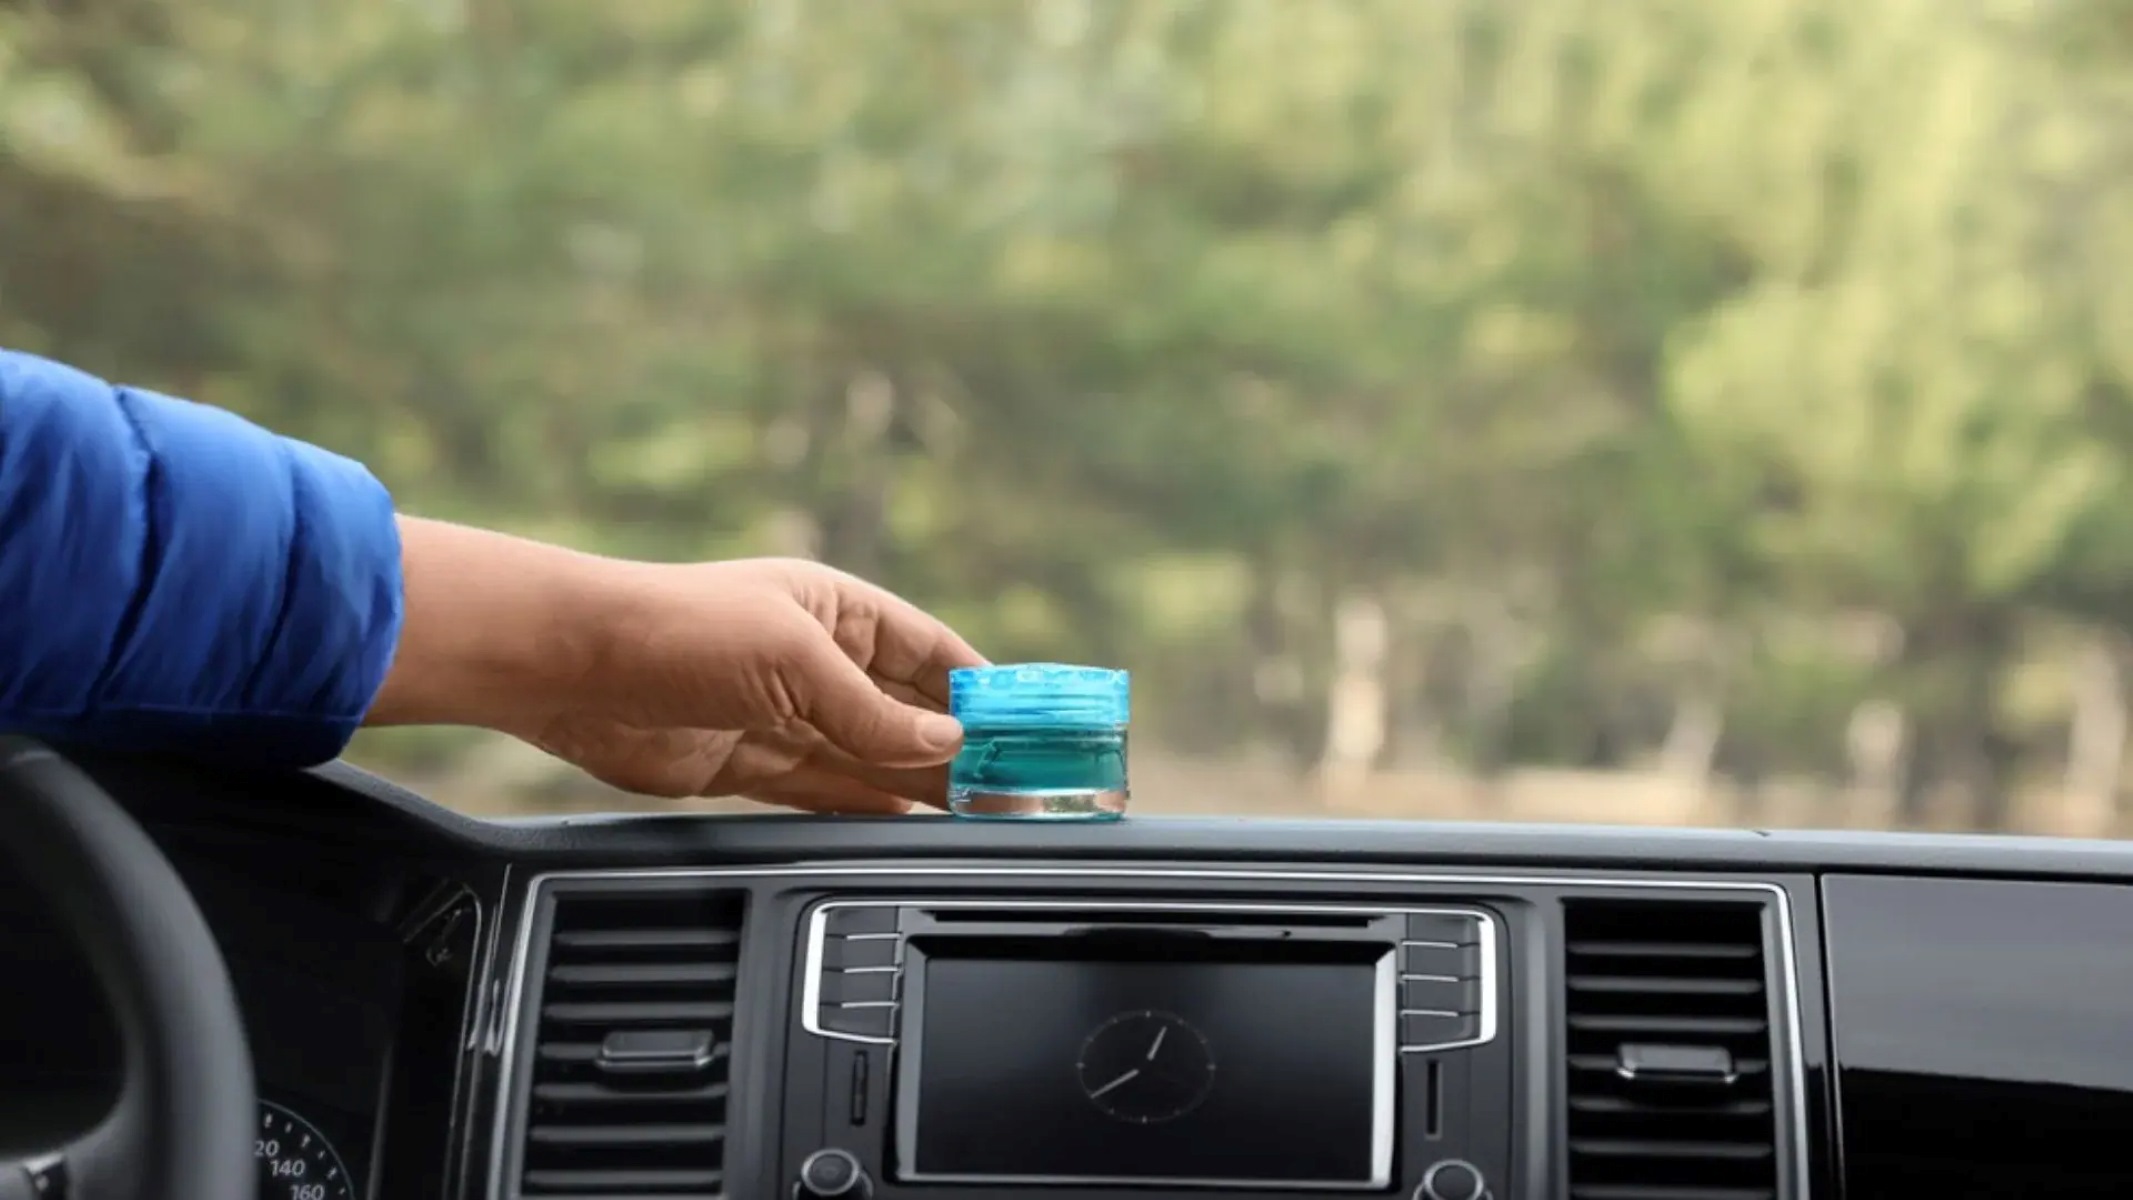 What Is The Best Deodorizer For Cars